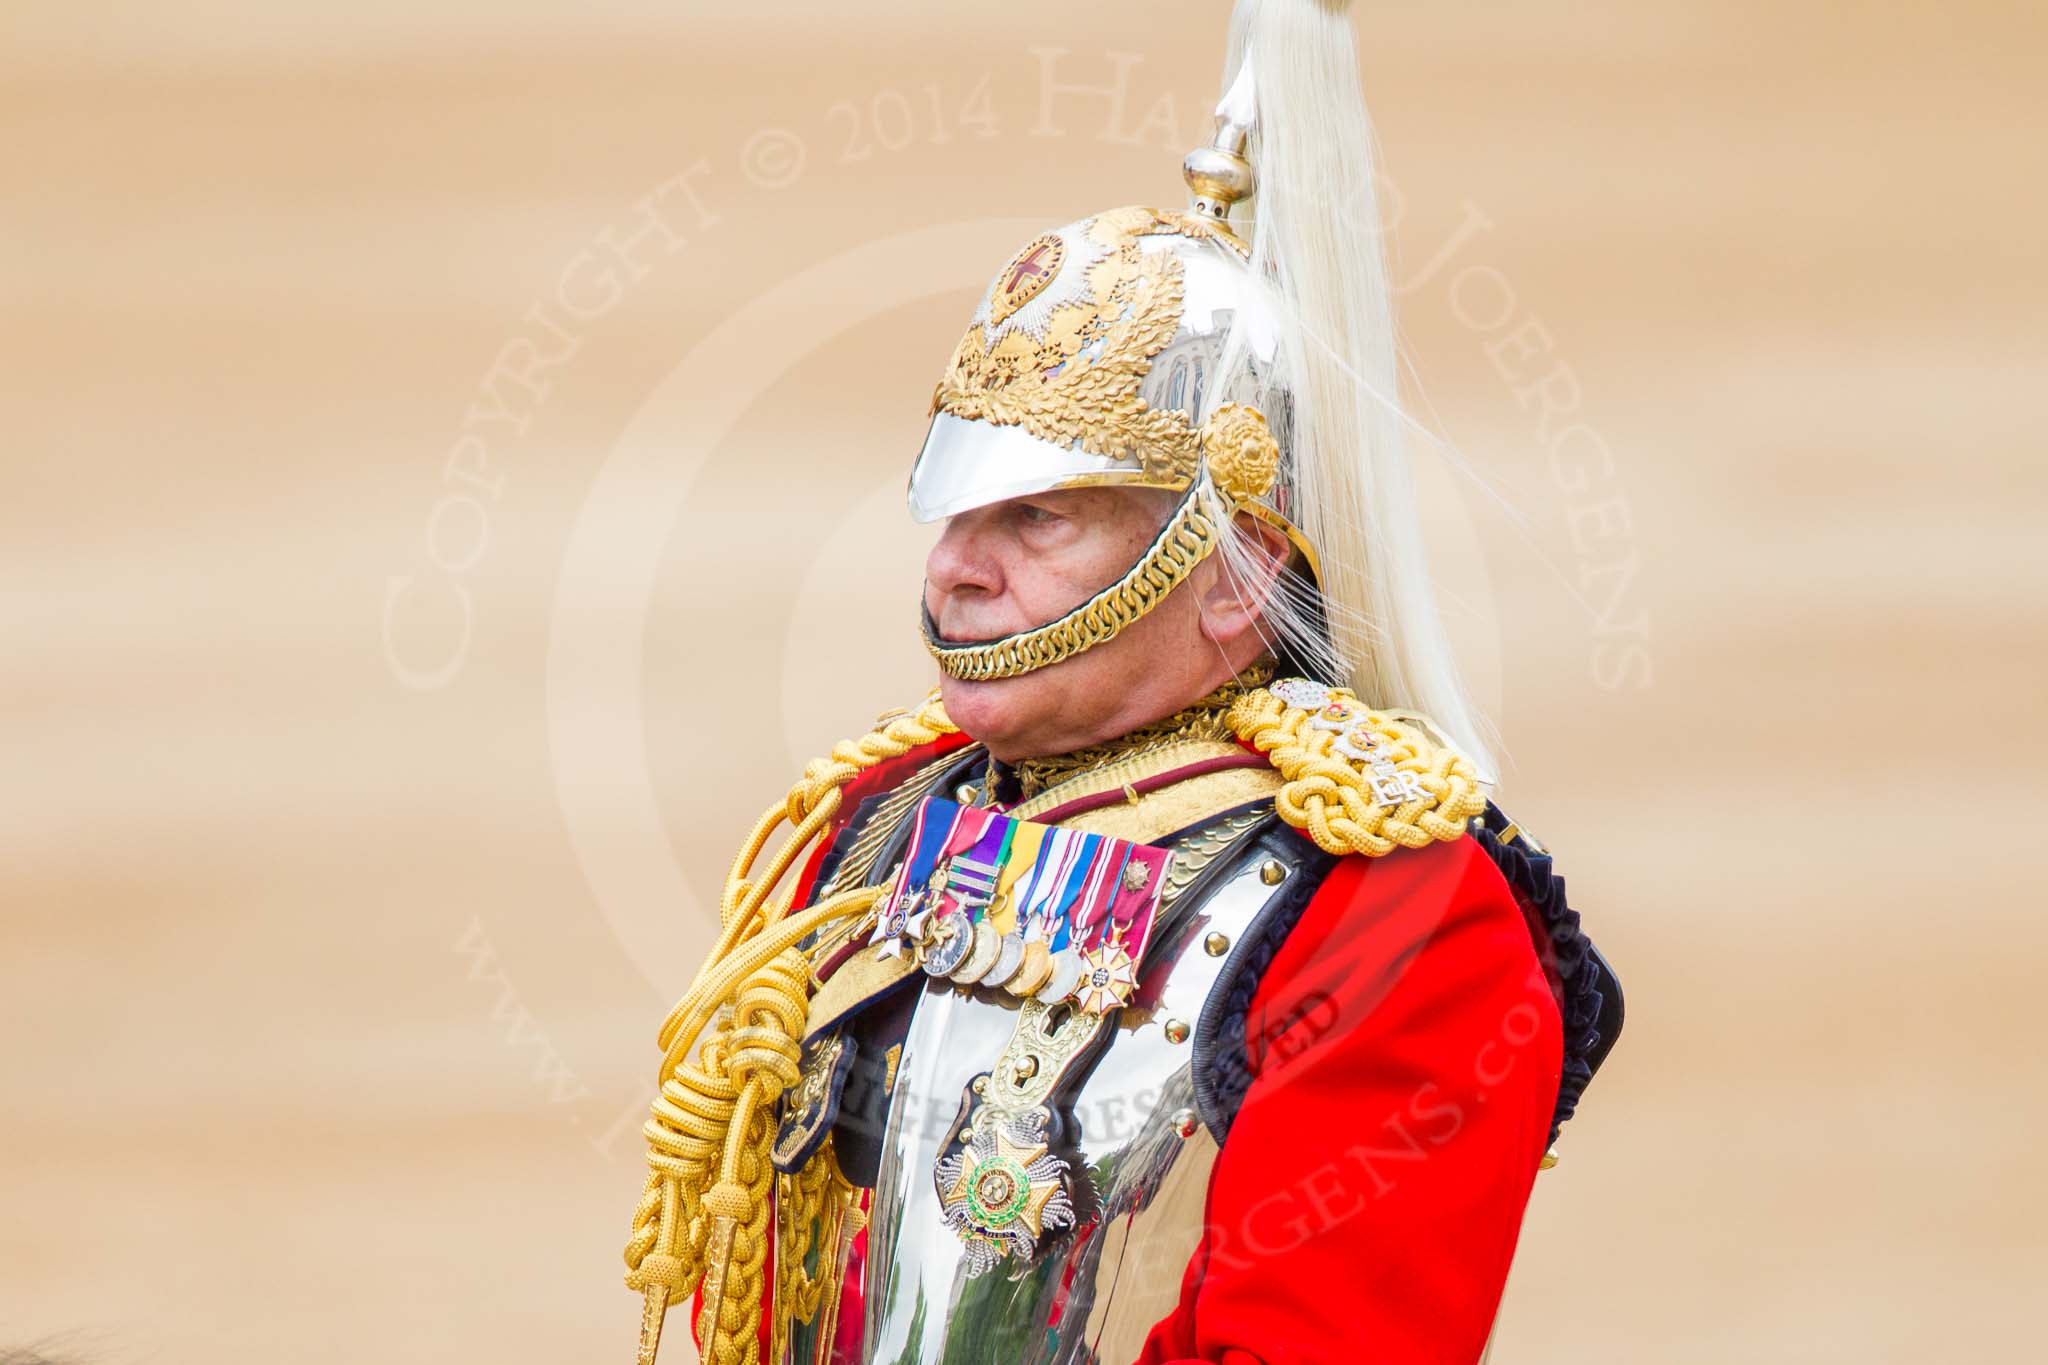 Trooping the Colour 2014.
Horse Guards Parade, Westminster,
London SW1A,

United Kingdom,
on 14 June 2014 at 11:03, image #393